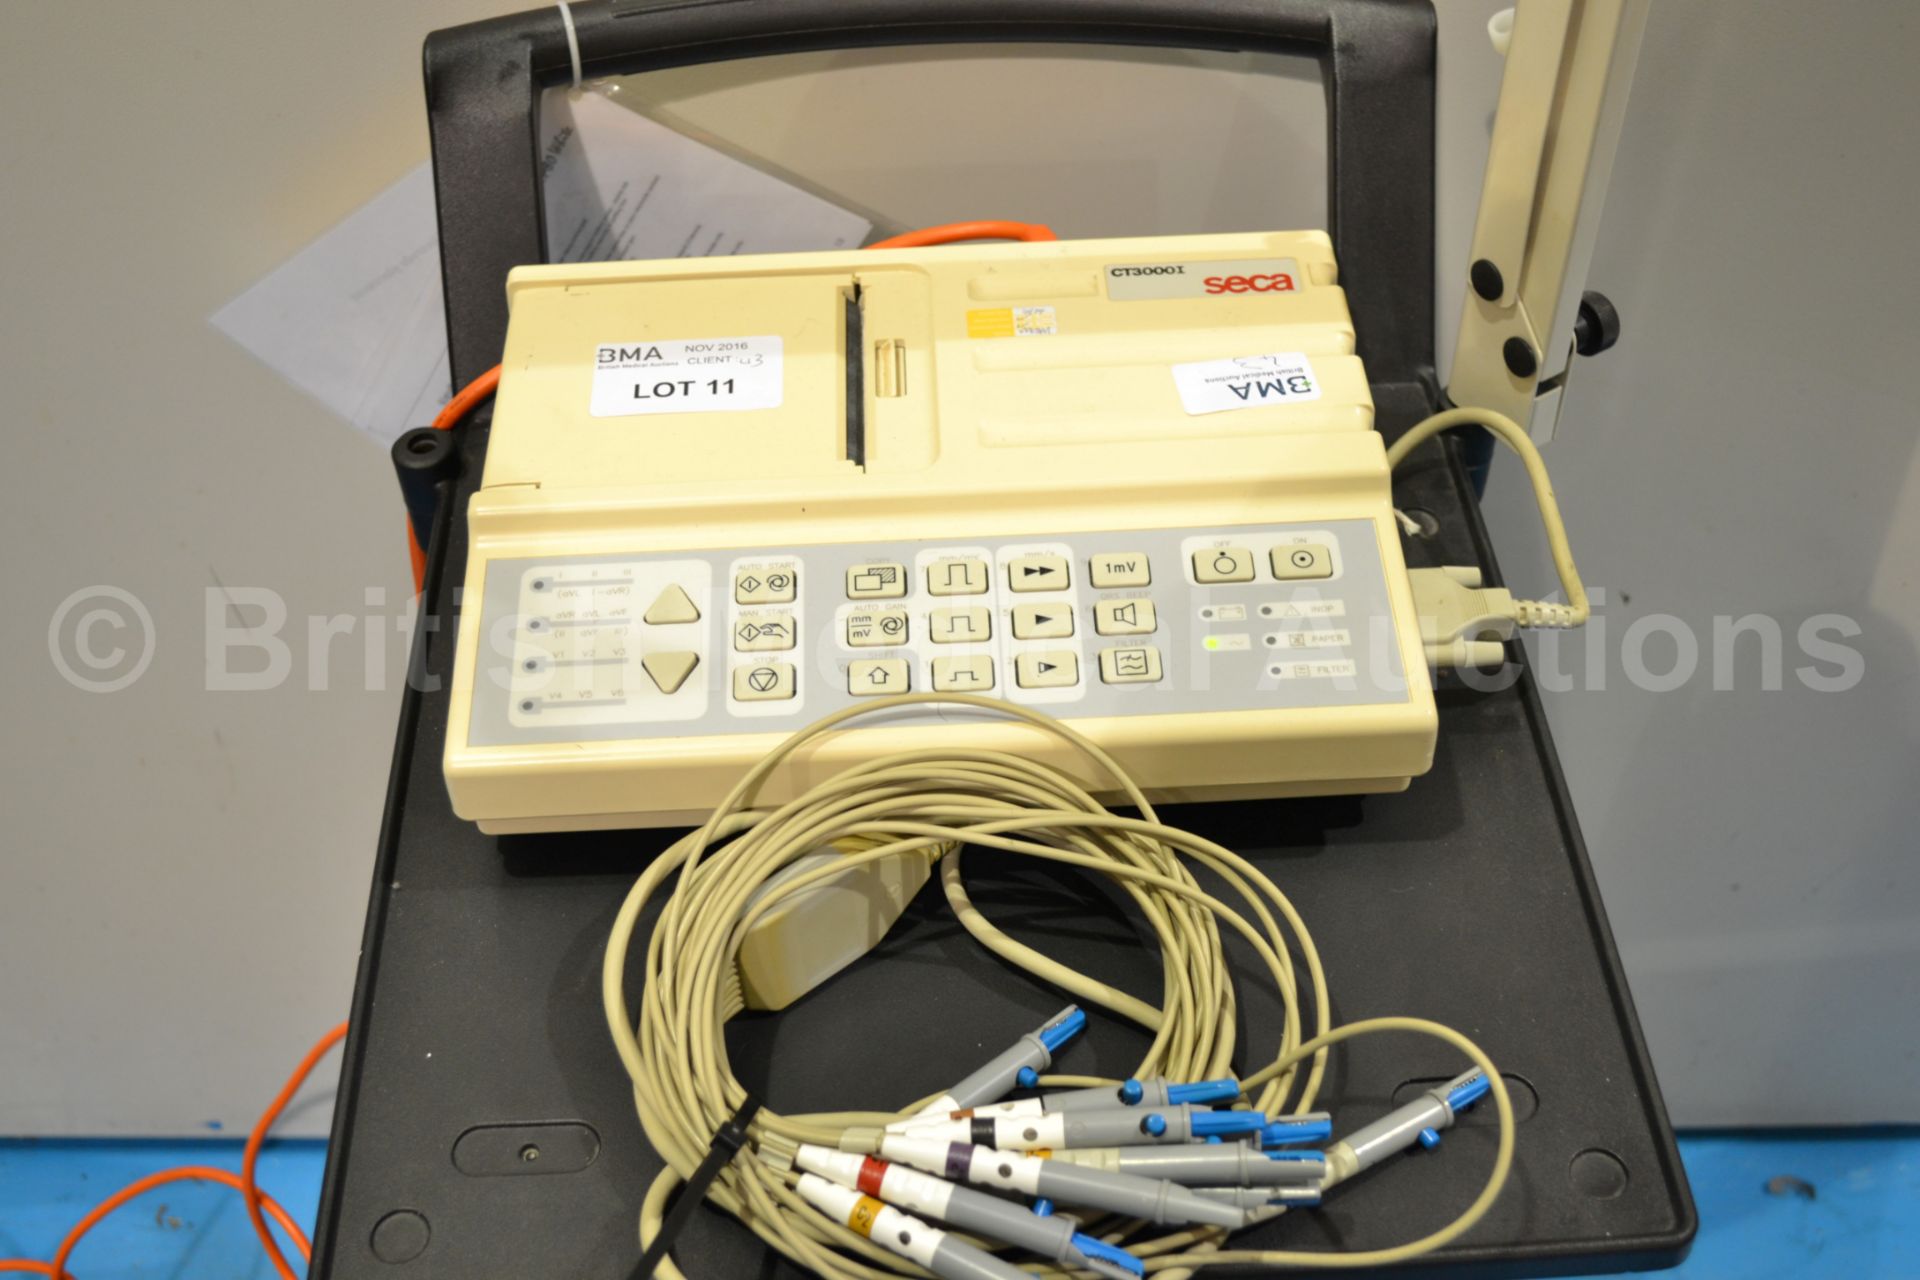 Seca CT3000I ECG Machine on Trolley with ECG Leads - Image 4 of 4